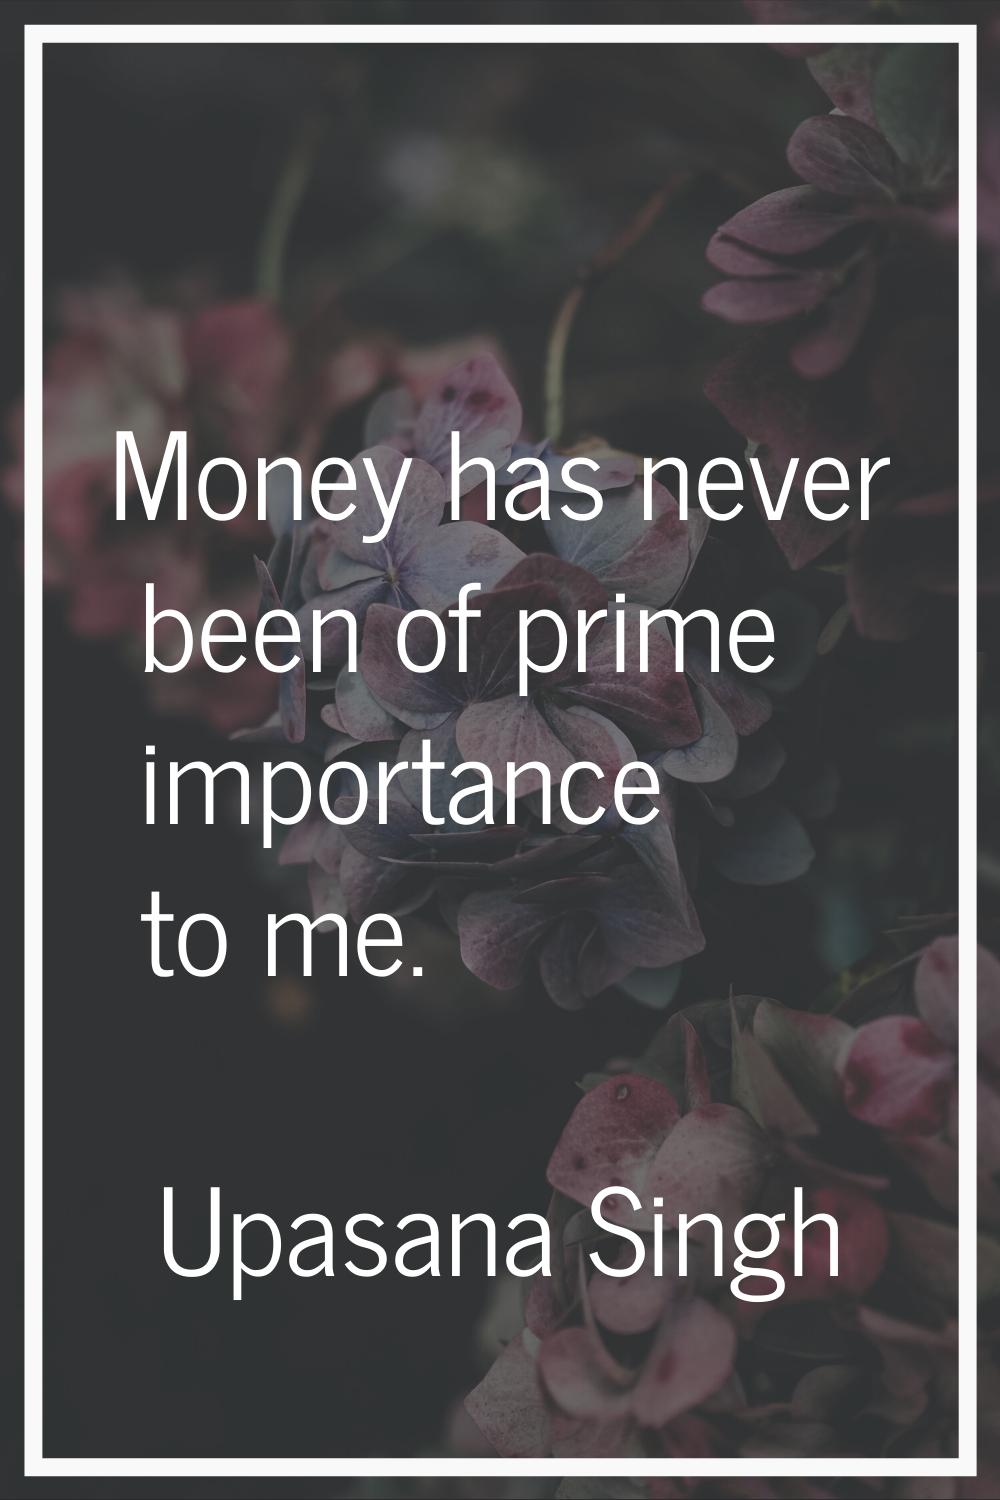 Money has never been of prime importance to me.